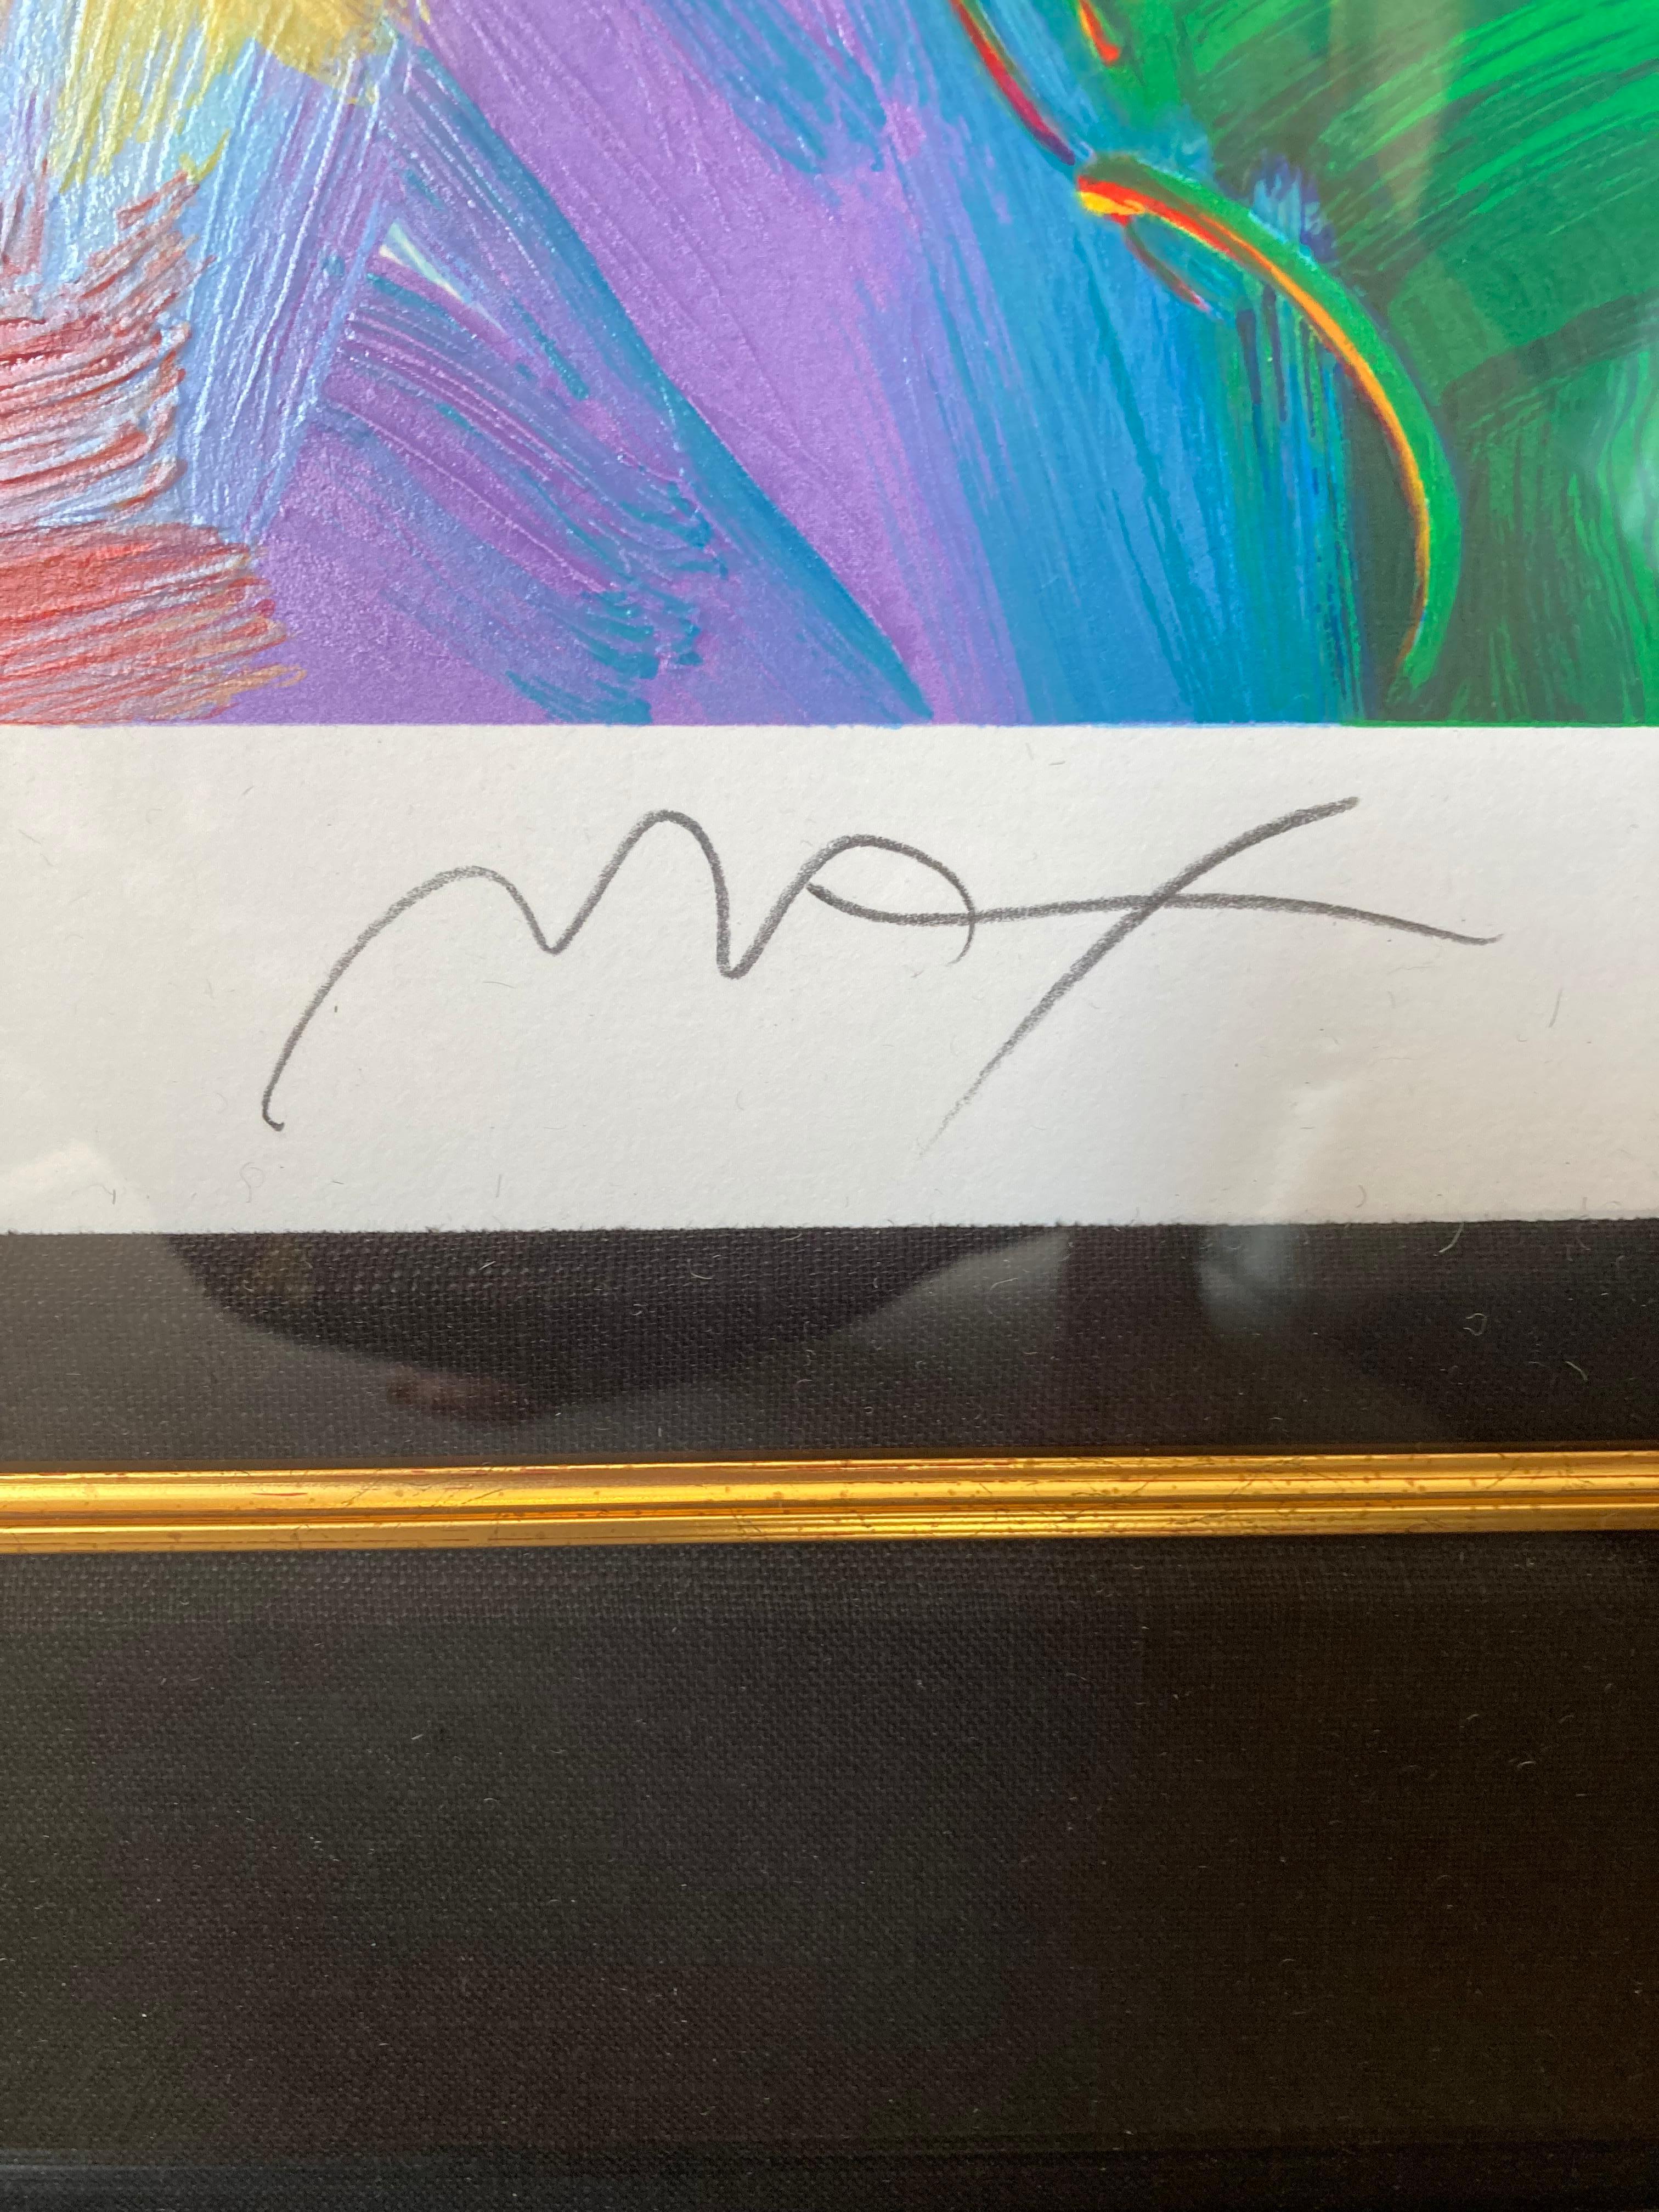 peter max lithograph value